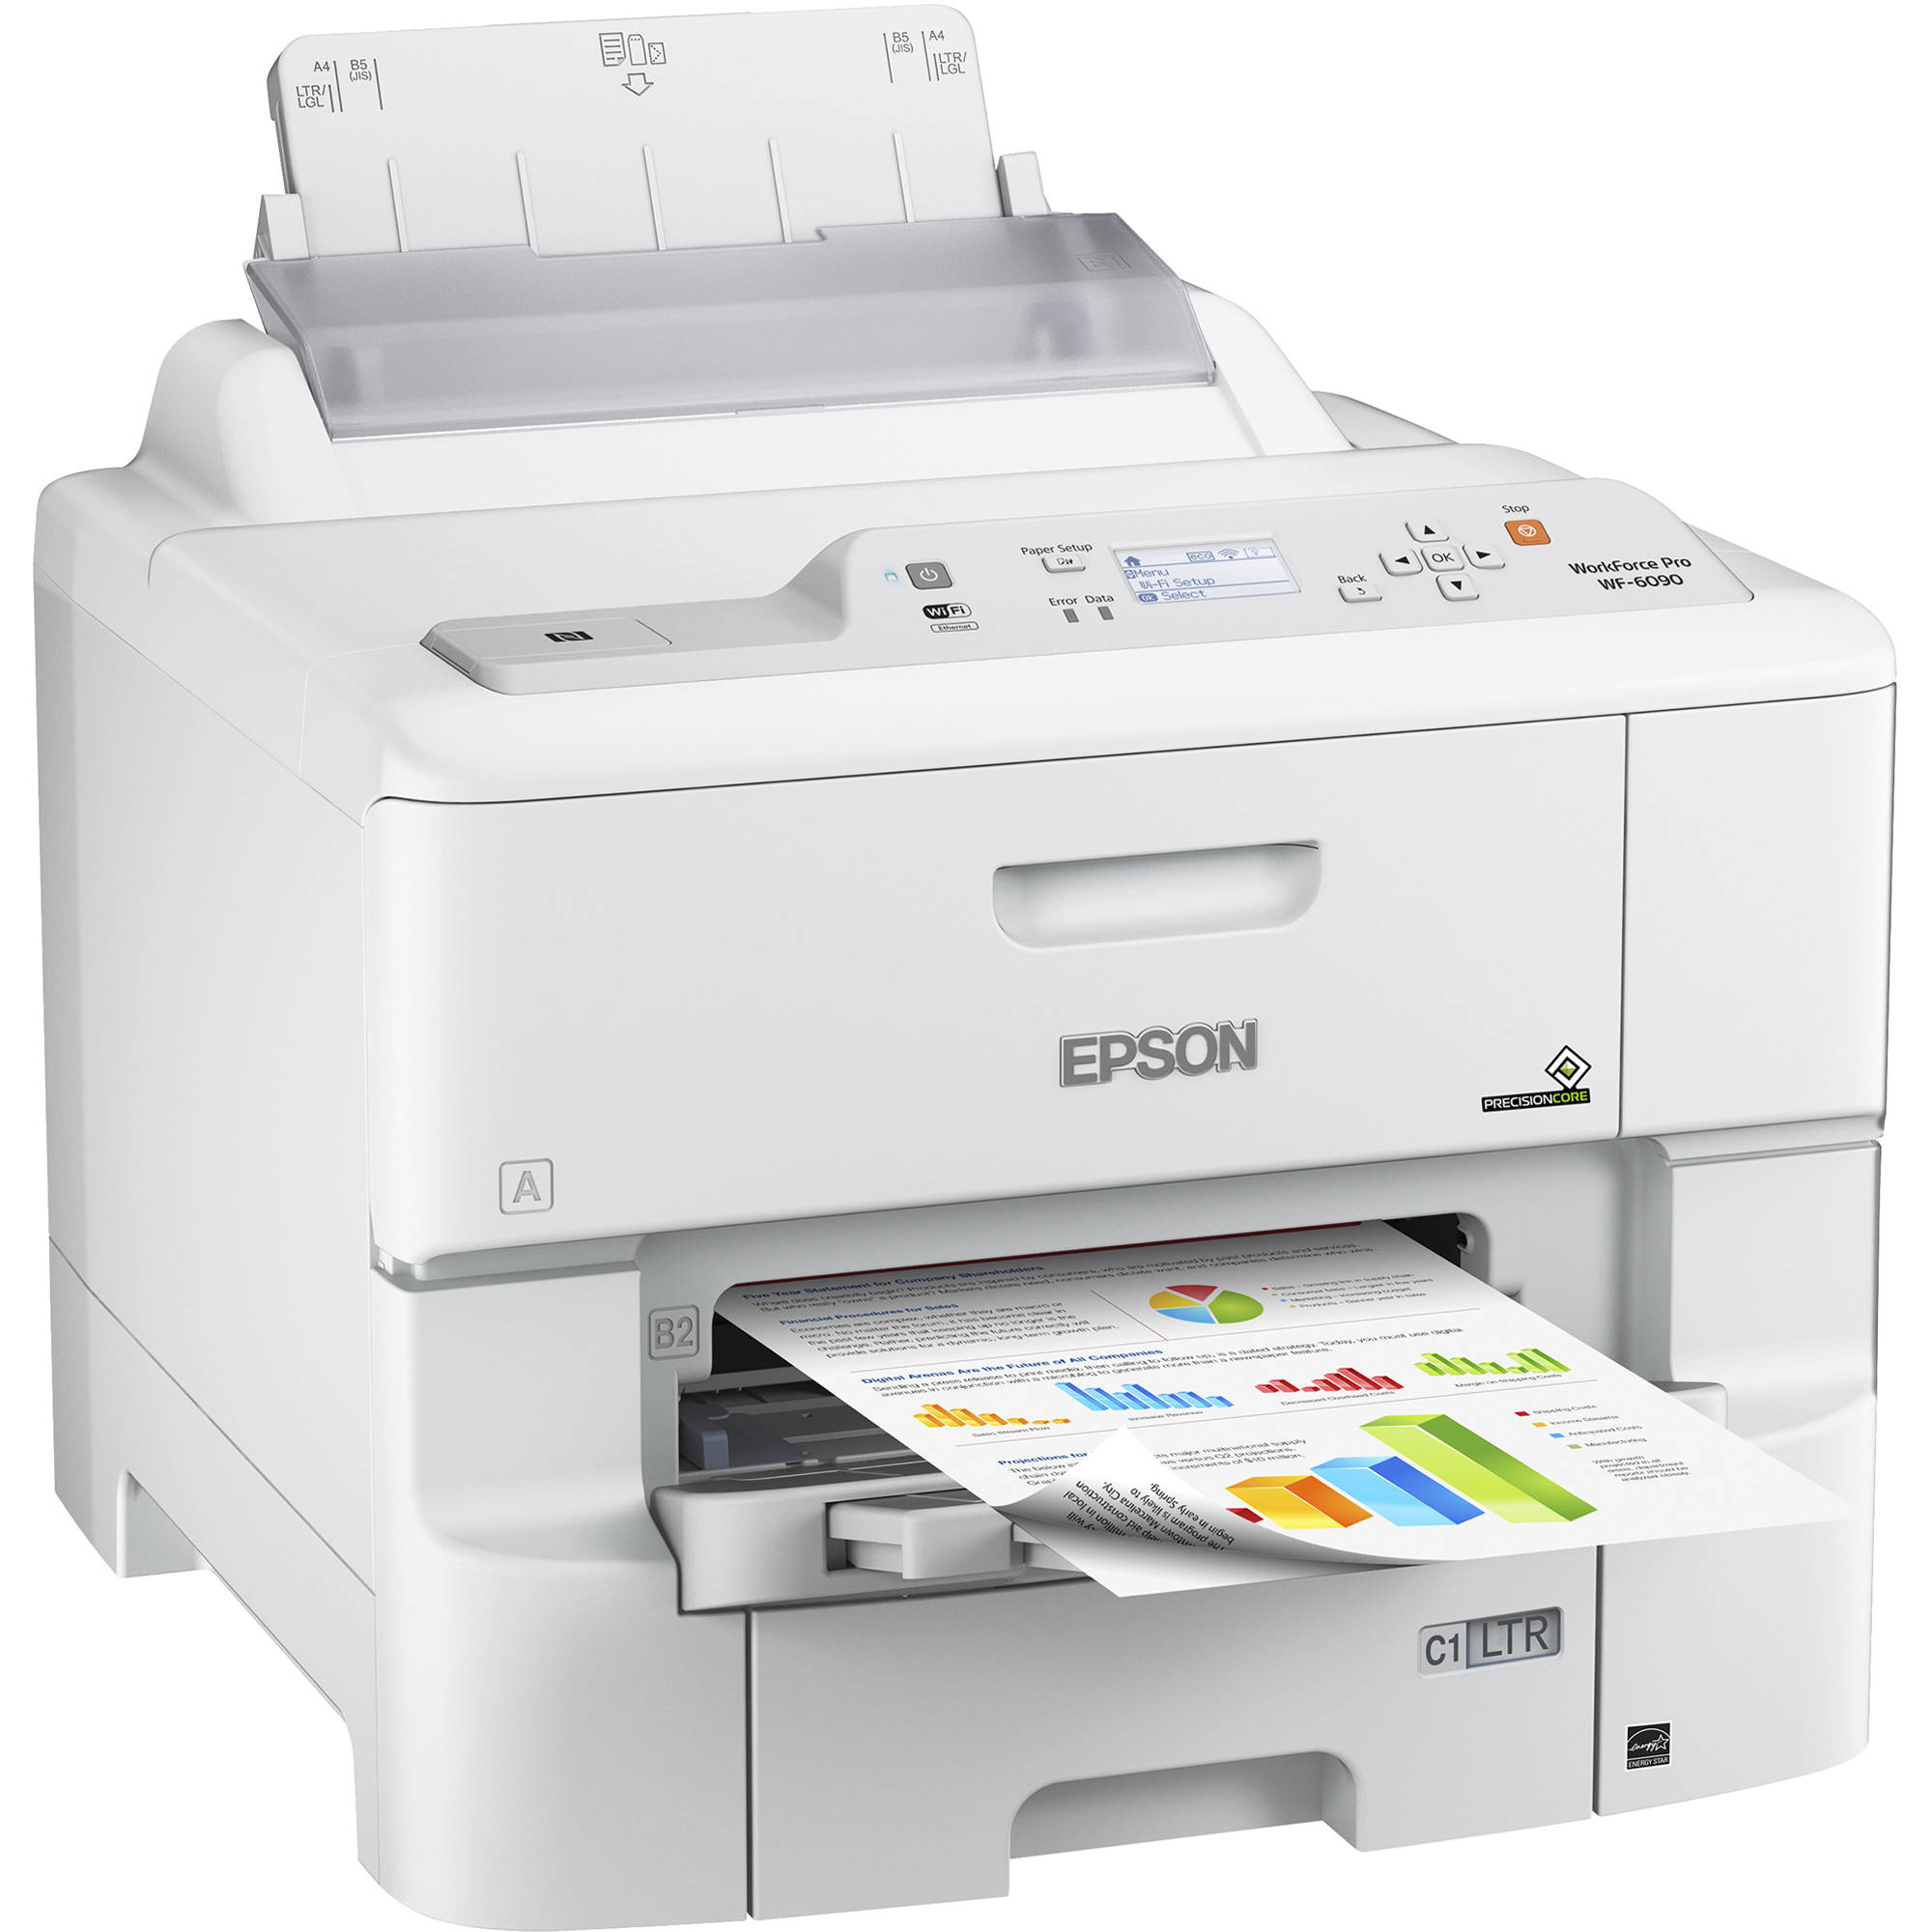 Absolute Toner New Epson WorkForce Pro WF-6090 Color Desktop Inkjet Printer With 4800 X 1200 Dpi Print, 34 PPM And Auto Duplex Printing For Home And Office Showroom Color Copier